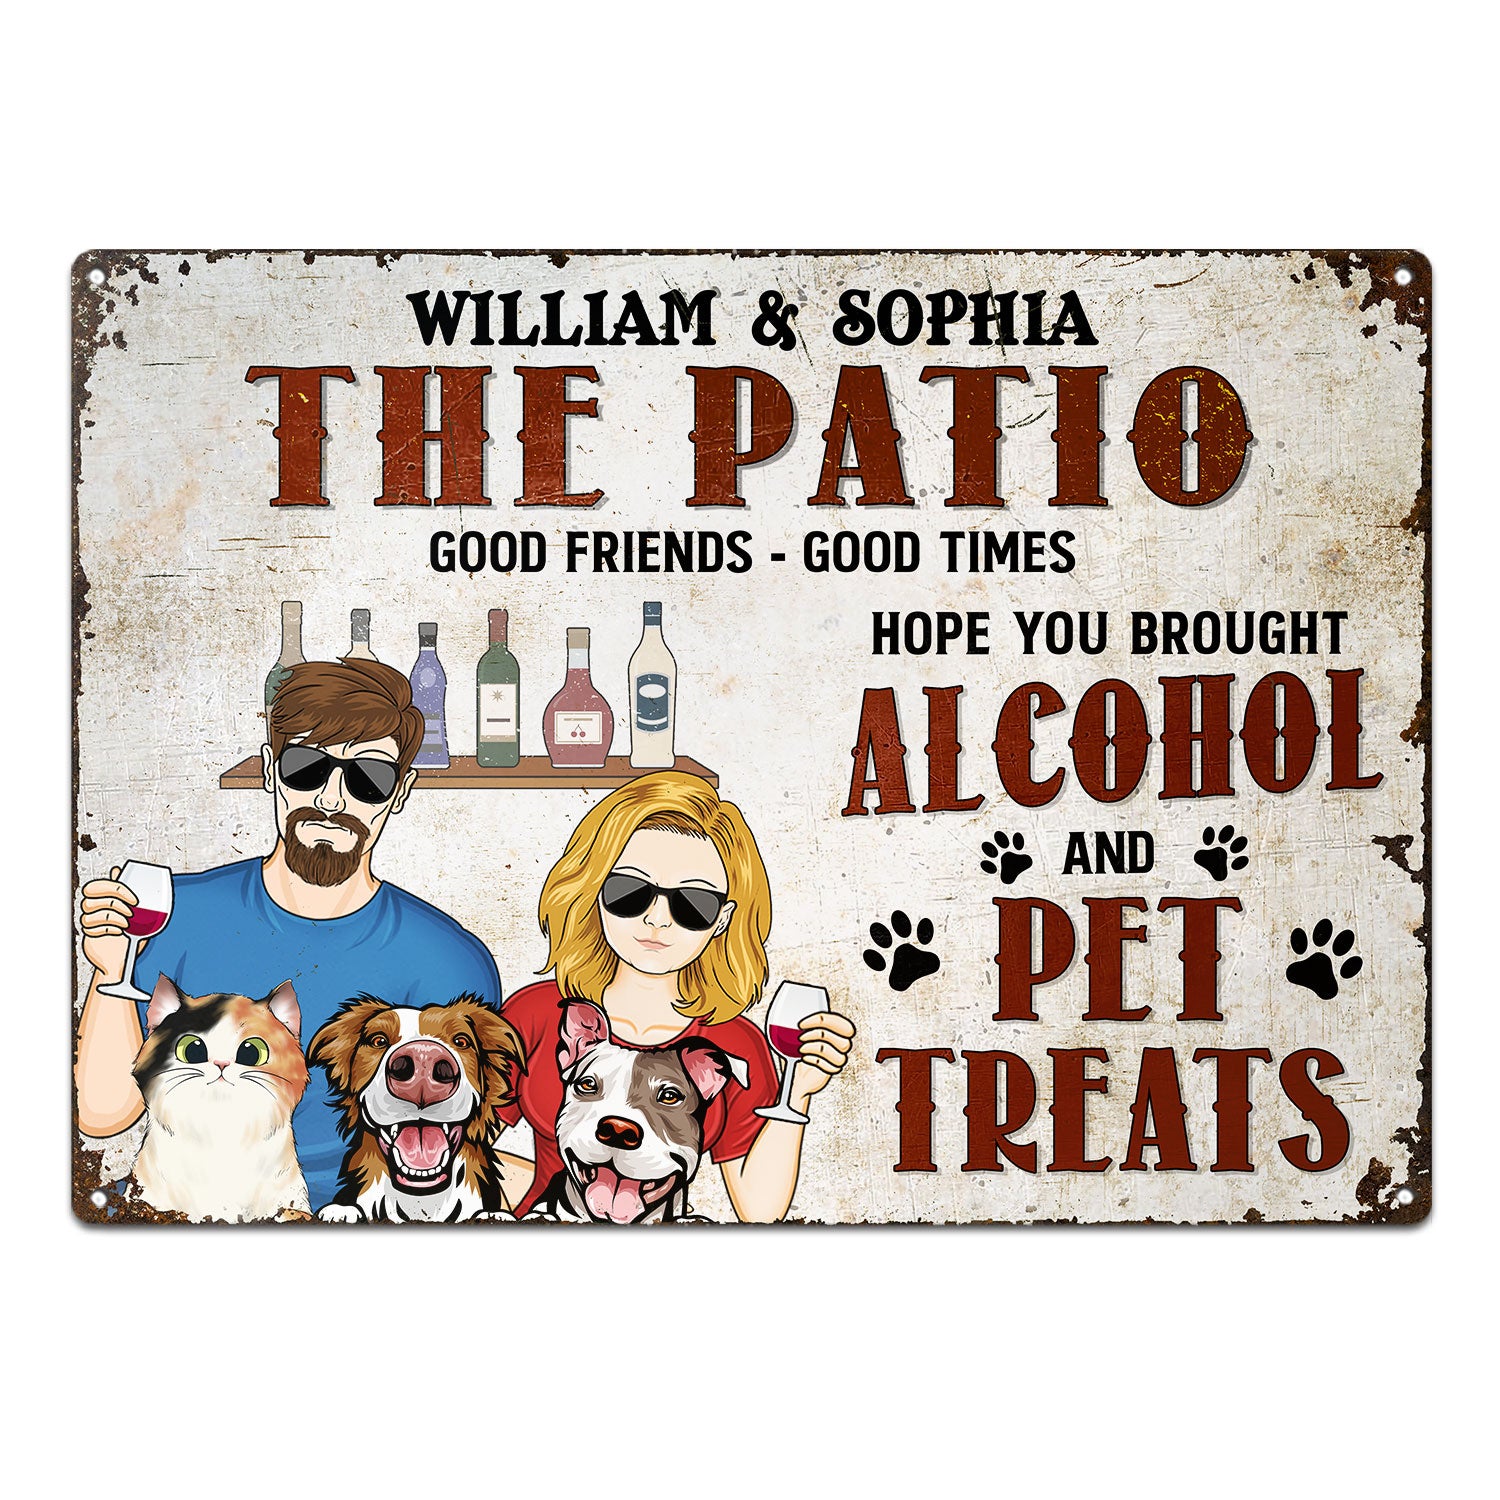 Patio Grilling Hope You Brought Alcohol And Dog Treats Cat Treats - Home Decor, Backyard Decor, Gift For Couples, Husband, Wife - Personalized Custom Classic Metal Signs